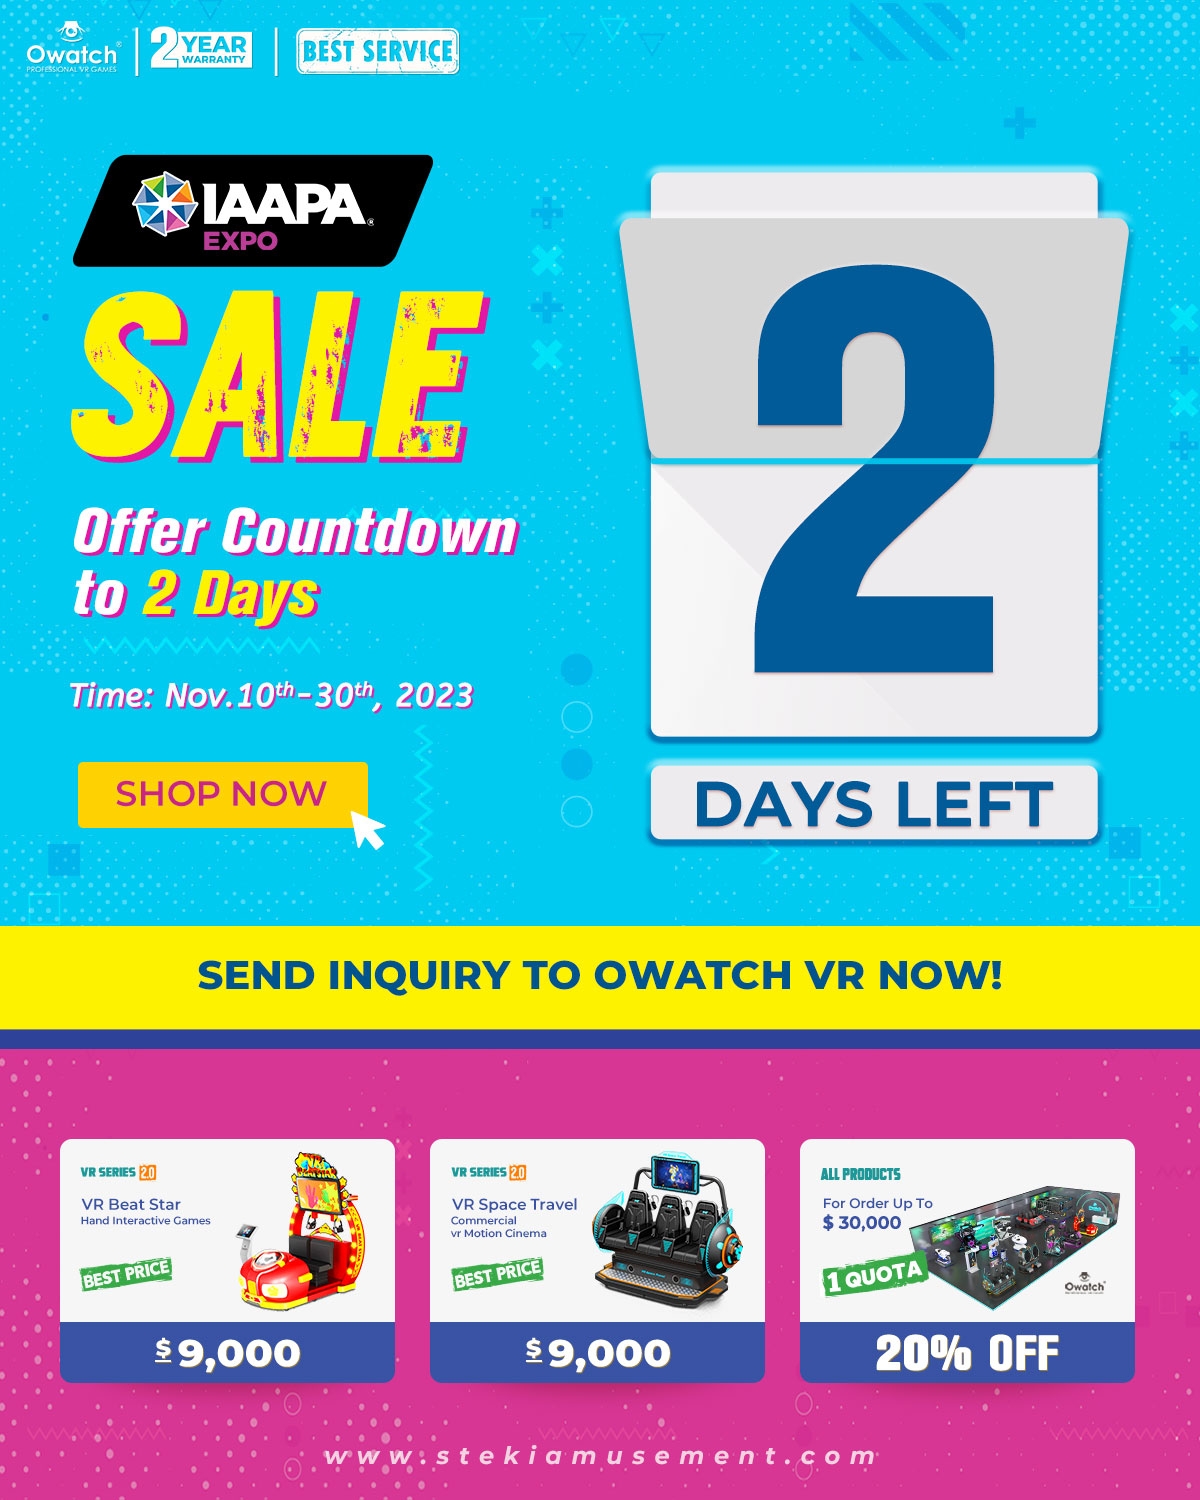 Last 2 Days of Owatch IAAPA Expo BIG Promotion